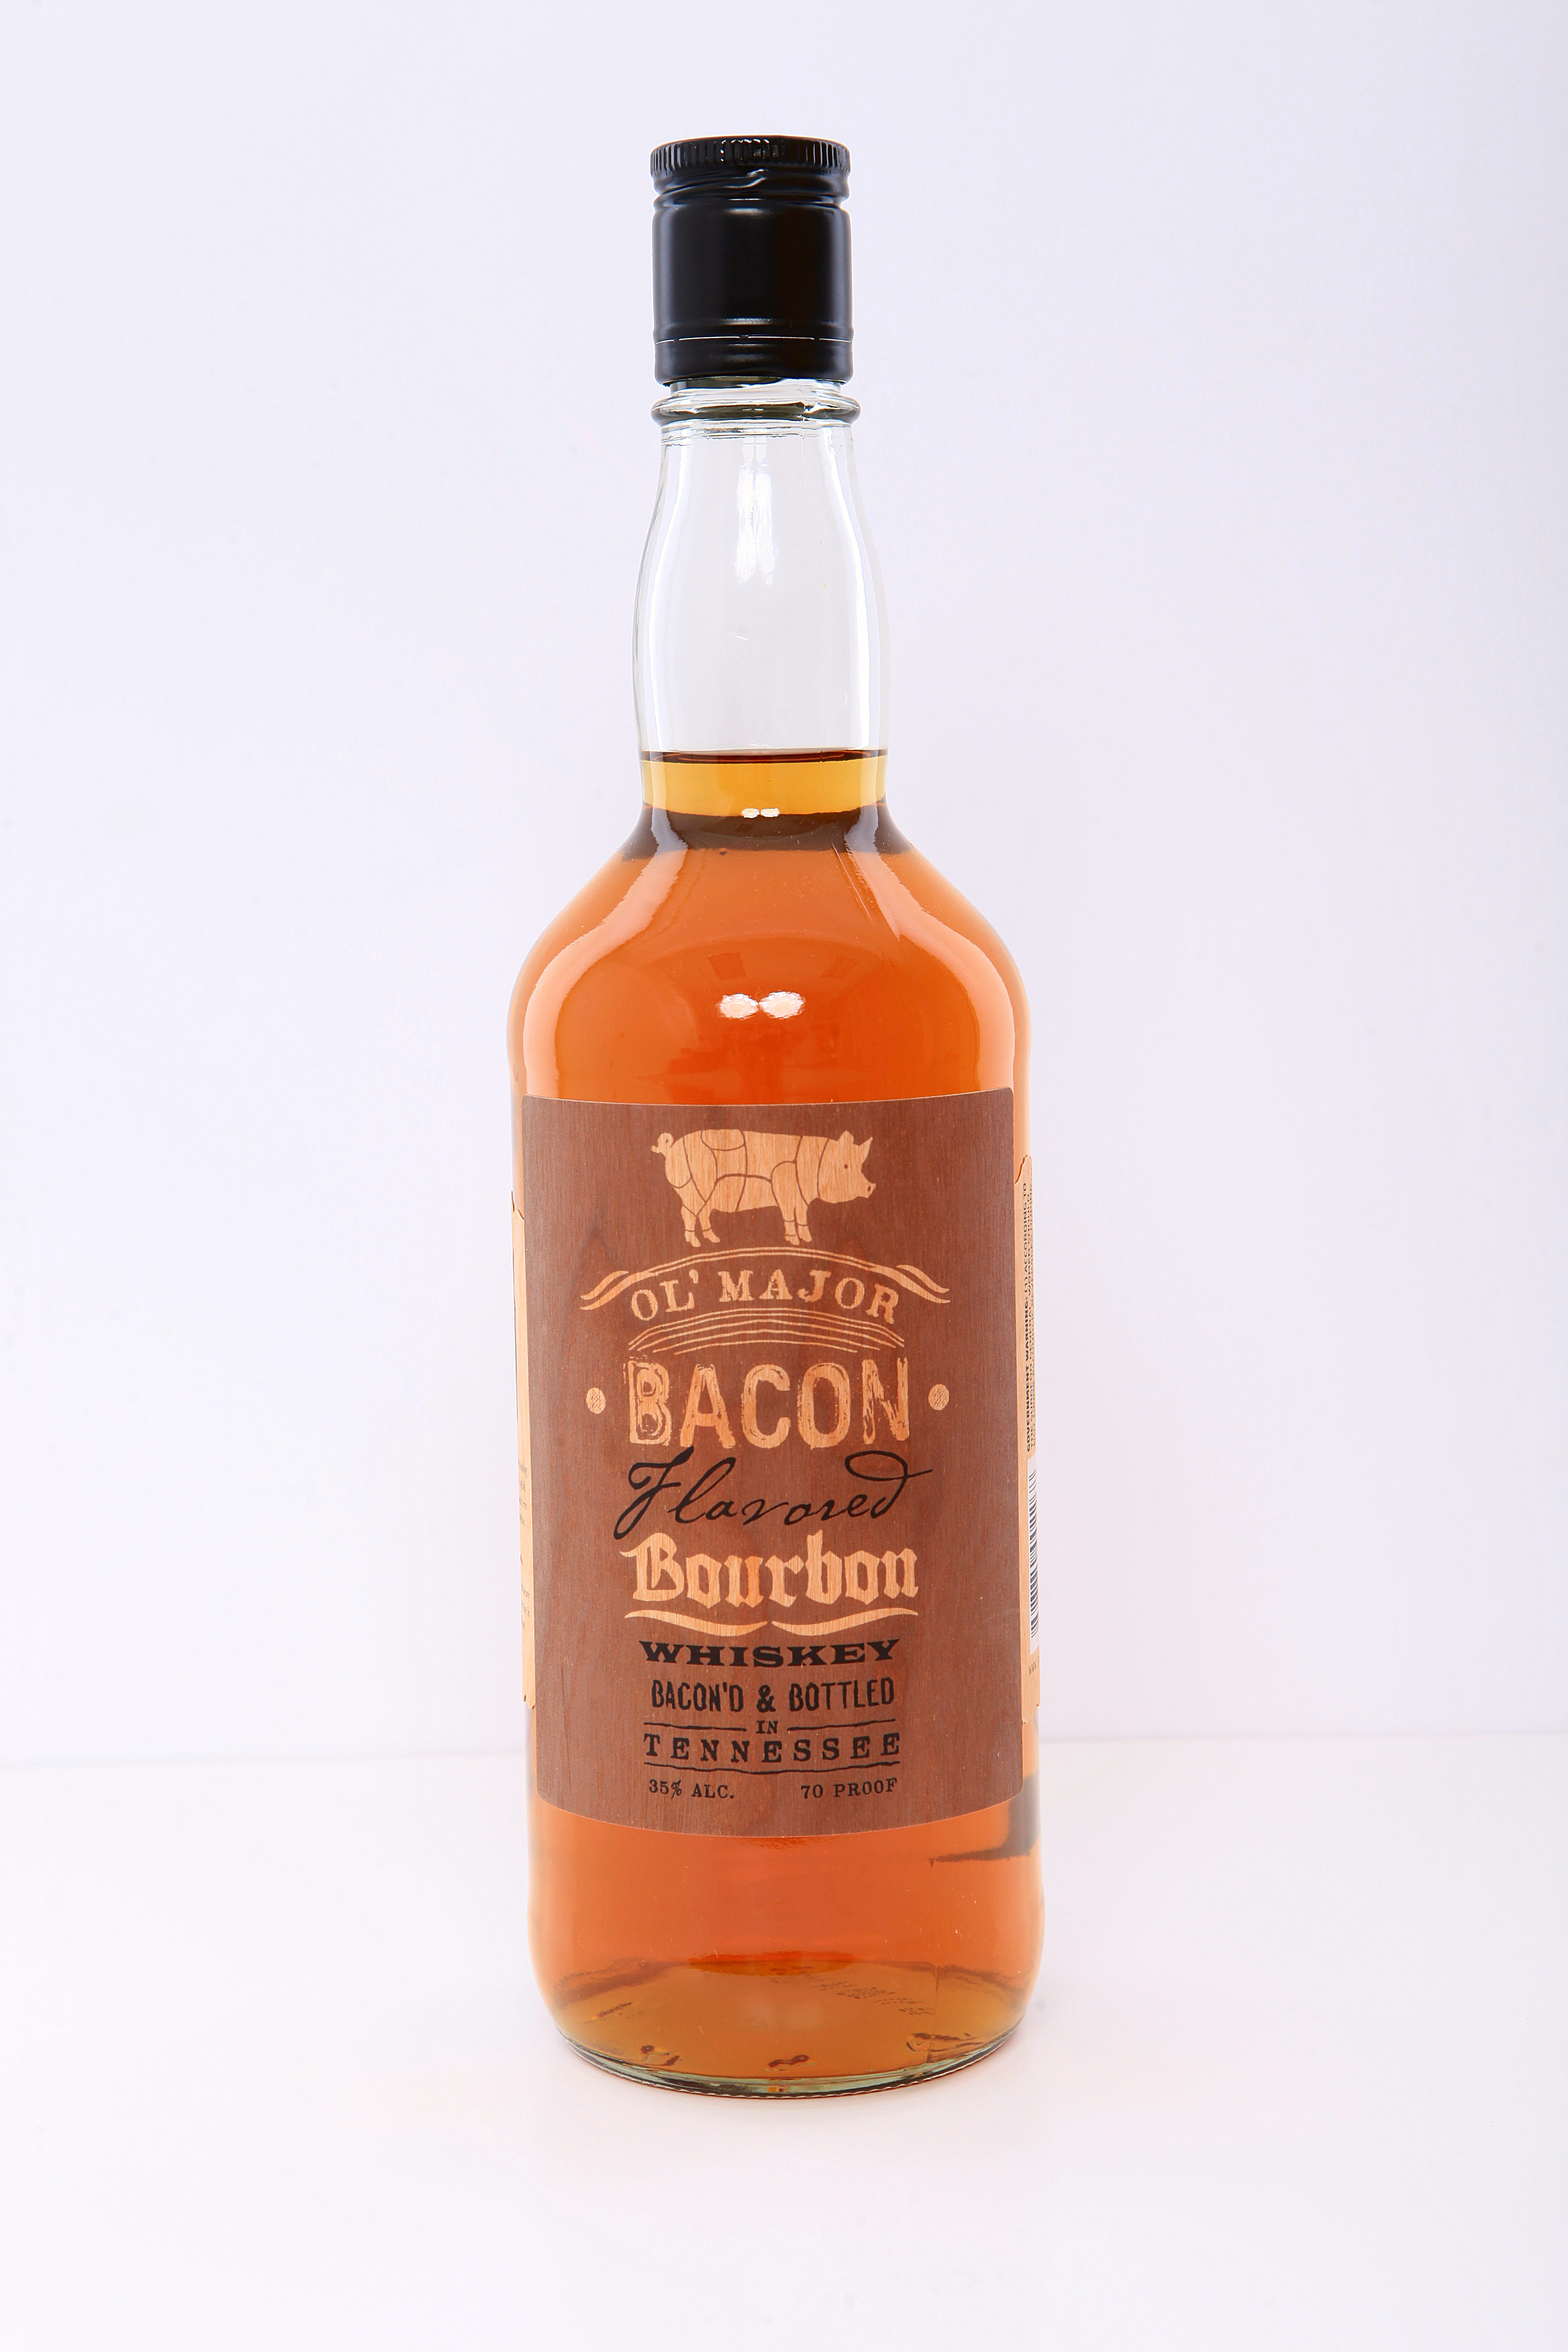 Ol’ Major, gold medal bourbon made with real bacon by Branded Spirit USA